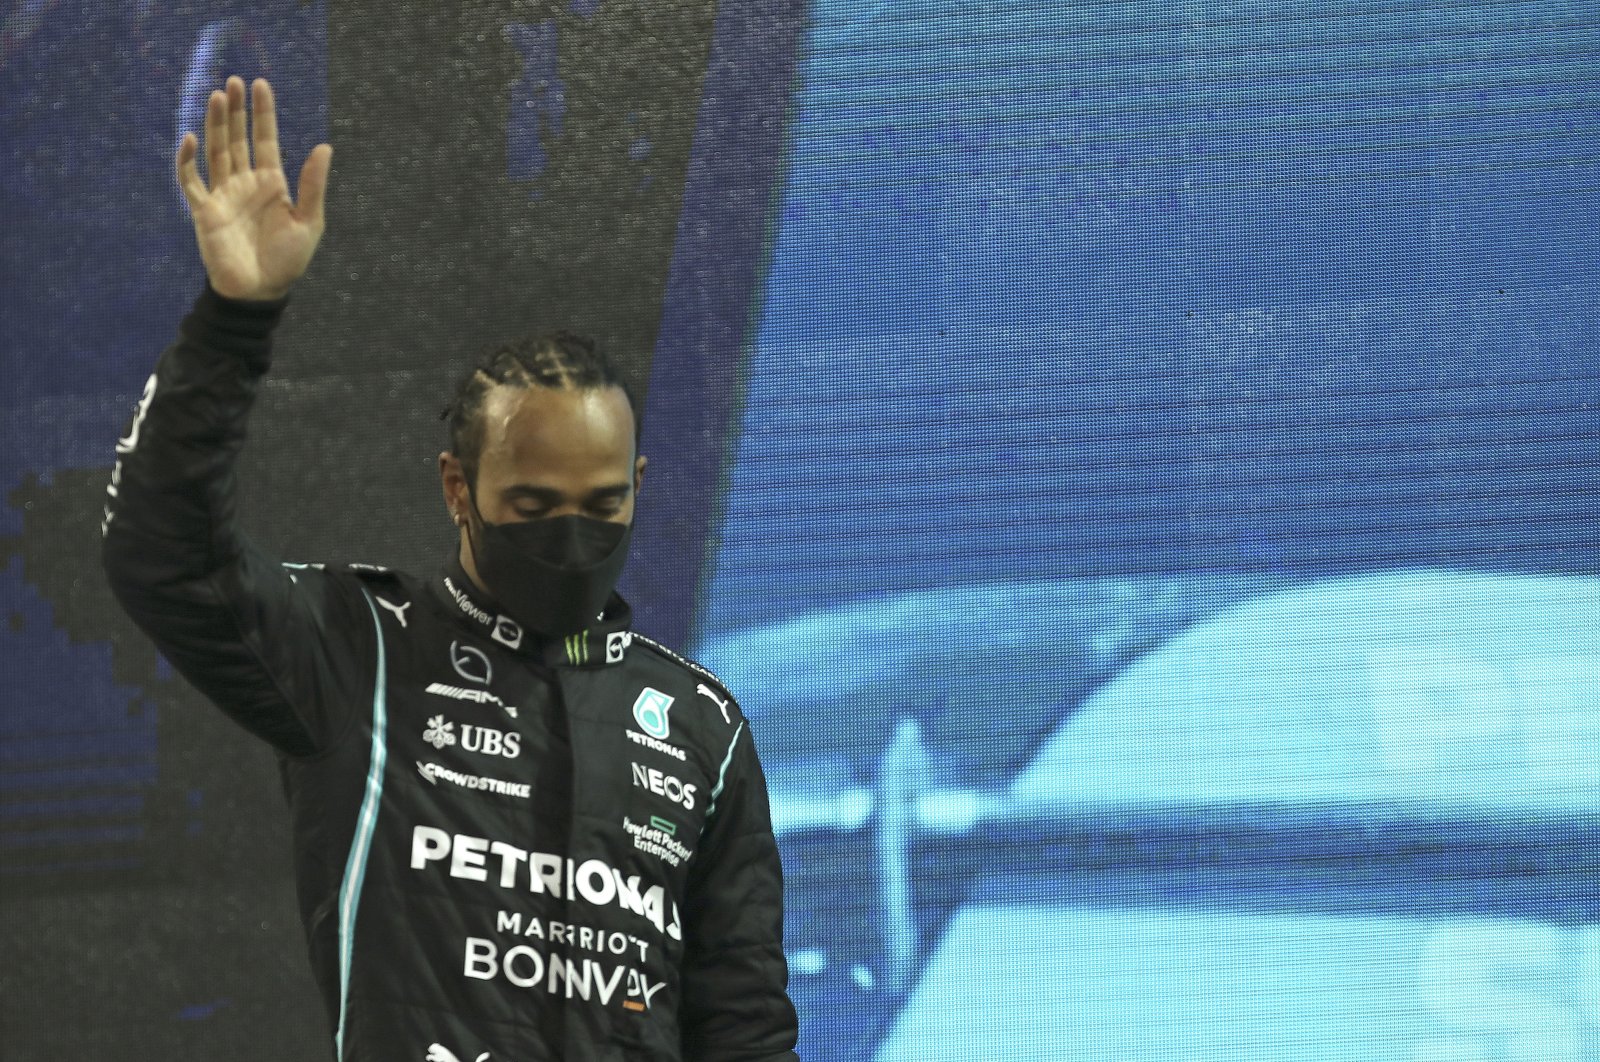 Mercedes driver Lewis Hamilton looks down as he walks onto the podium after finishing second in the F1 Abu Dhabi GP in Abu Dhabi, UAE, Dec. 12. 2021. (AP Photo)